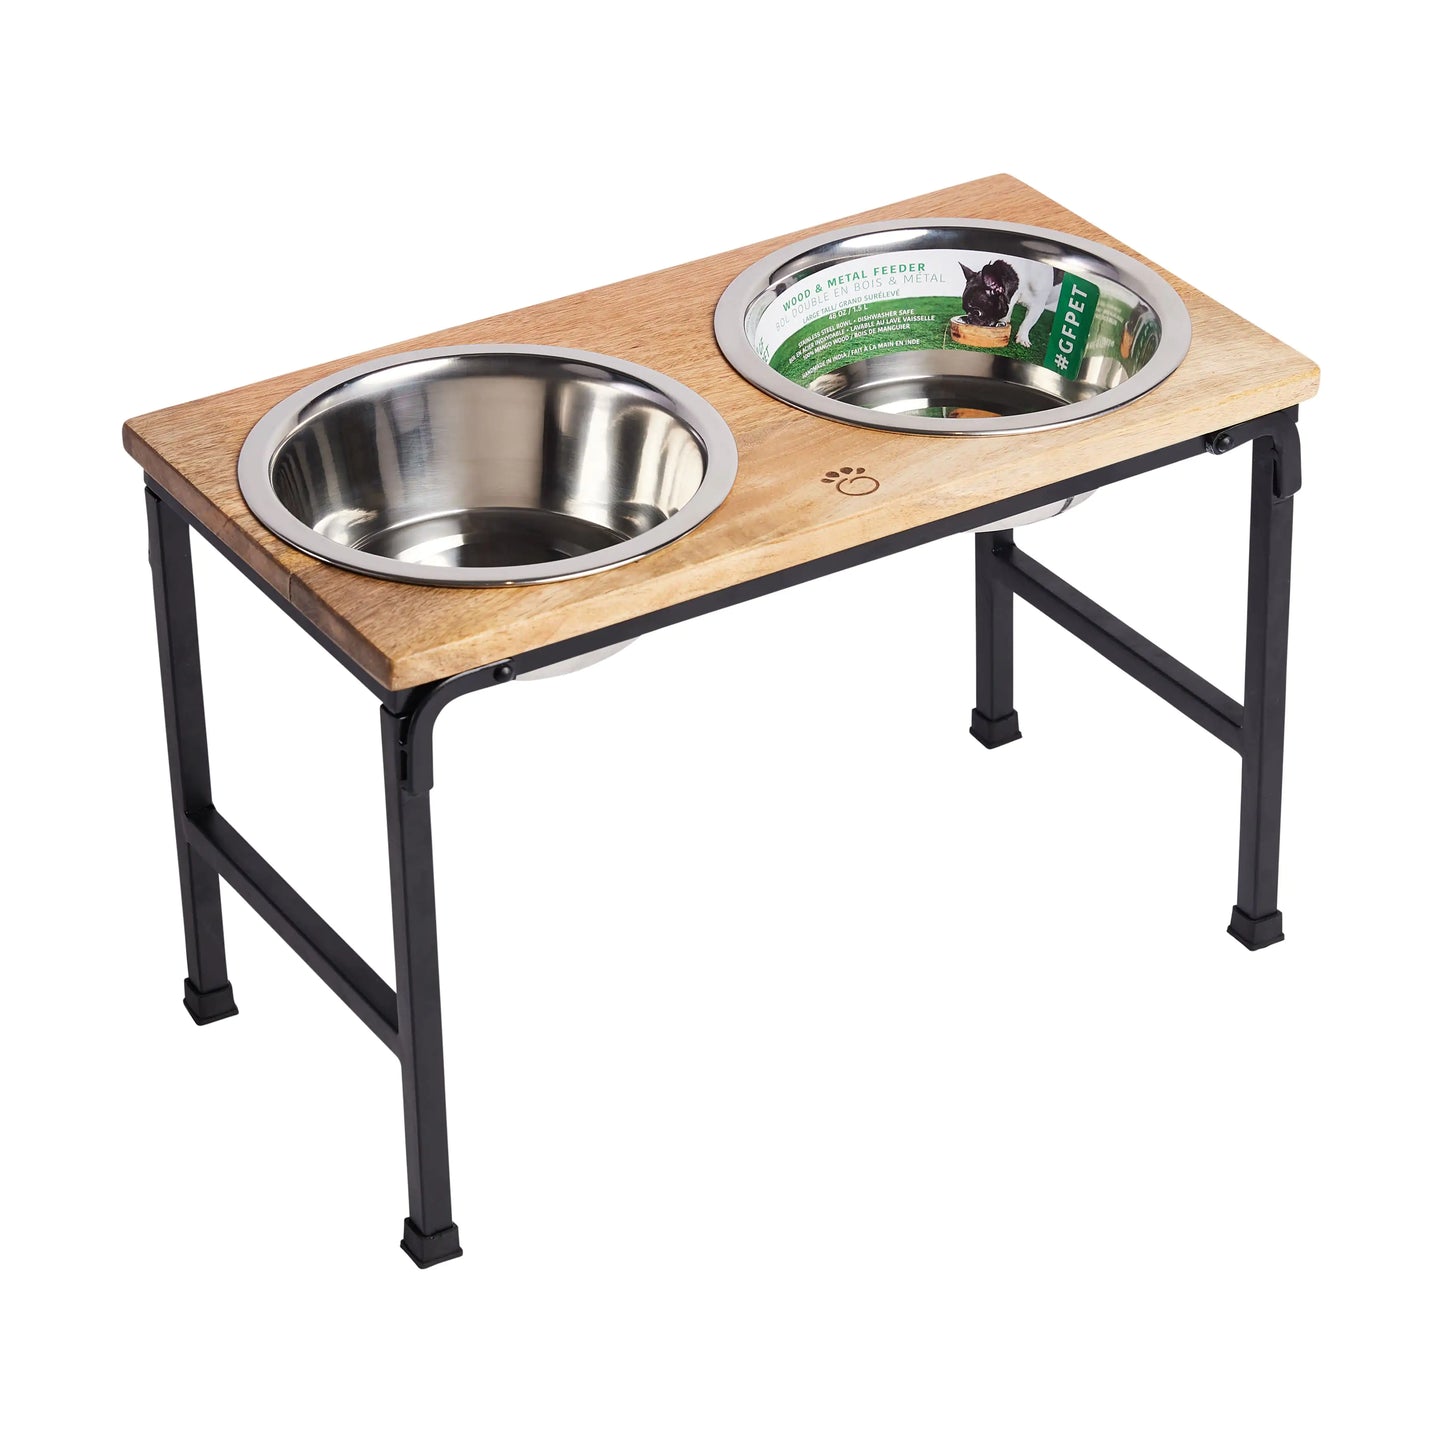 Elevated Food and Water Bowls